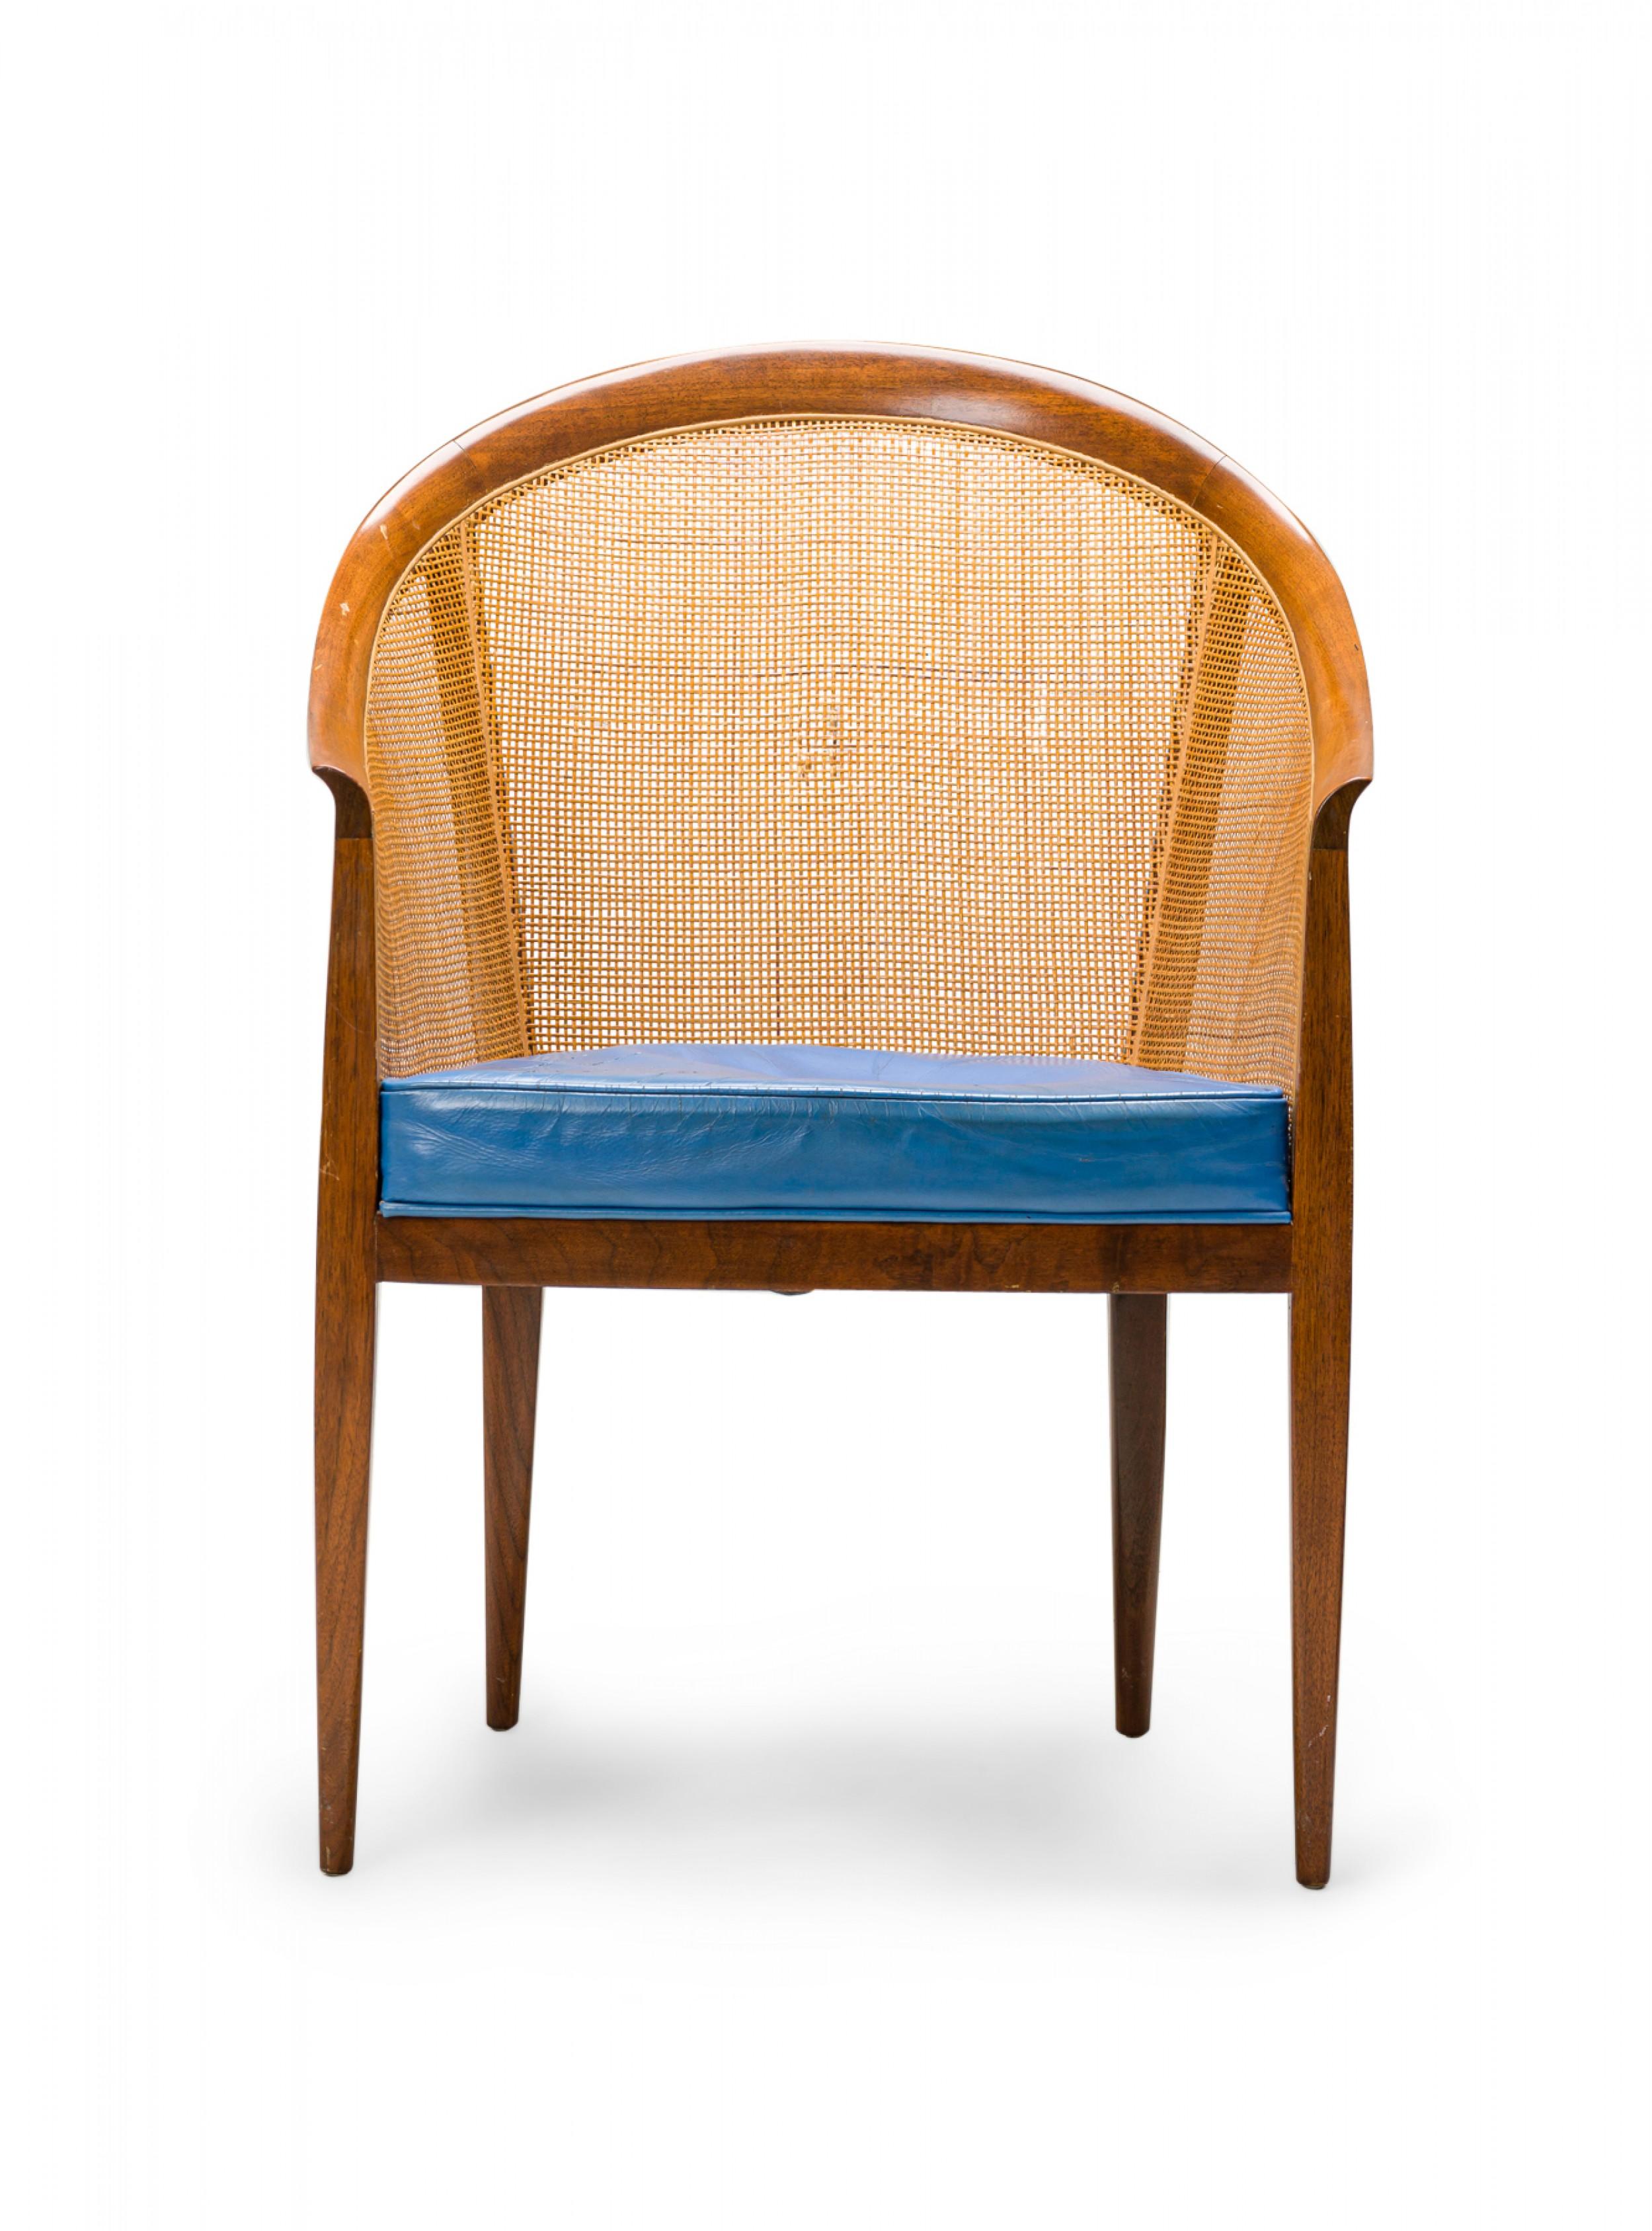 PAIR of American Mid-Century pull up chairs with rounded back walnut frames with caned backs and sides and blue leather seat cushions, resting on four tapered legs. (KIPP STEWART FOR DIRECTIONAL)(PRICED AS PAIR)
